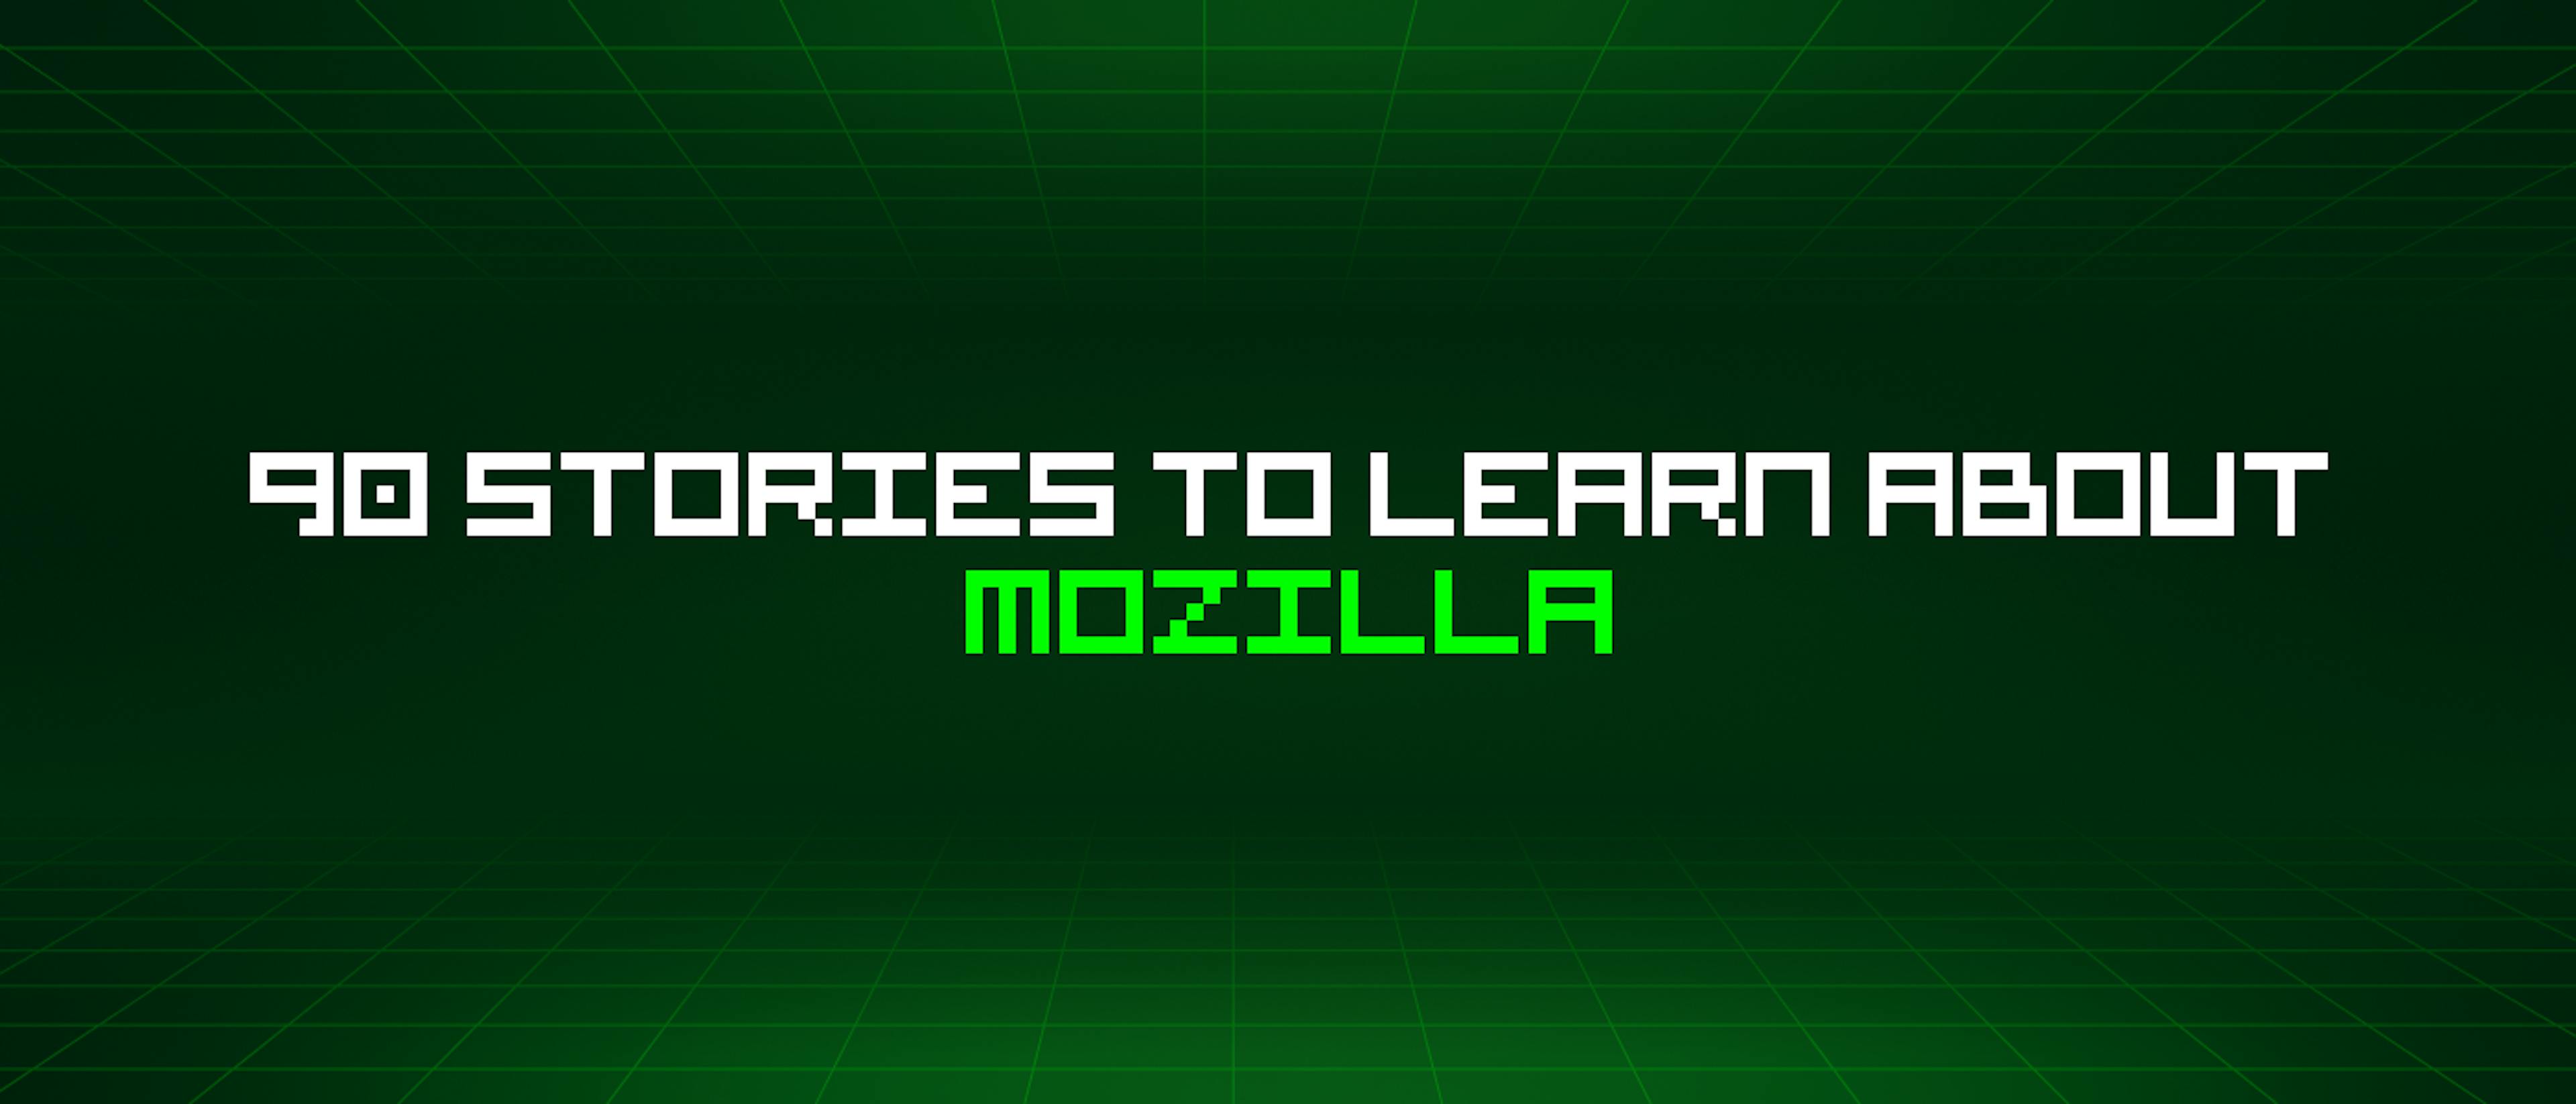 /90-stories-to-learn-about-mozilla feature image